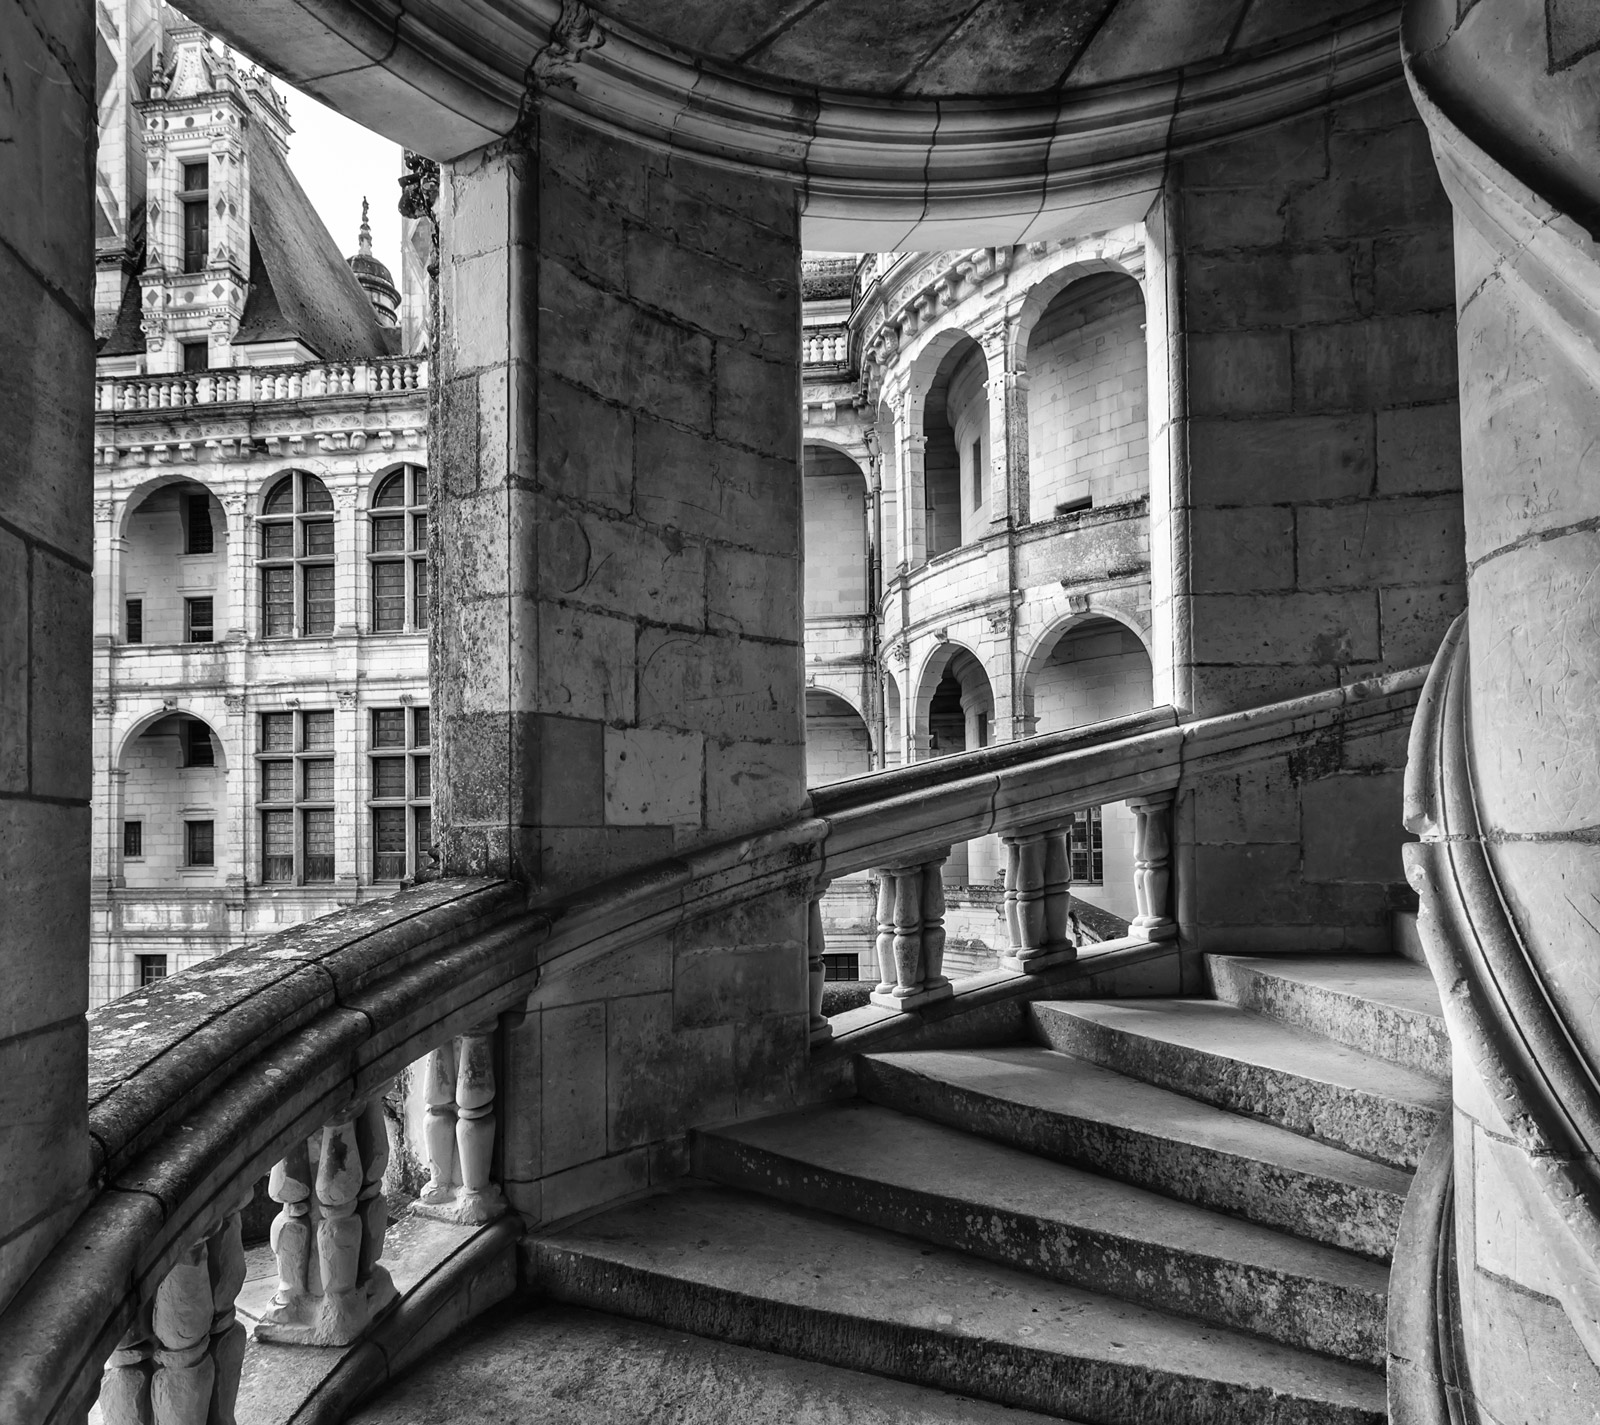 The kings stairway at chateau de chambord in france